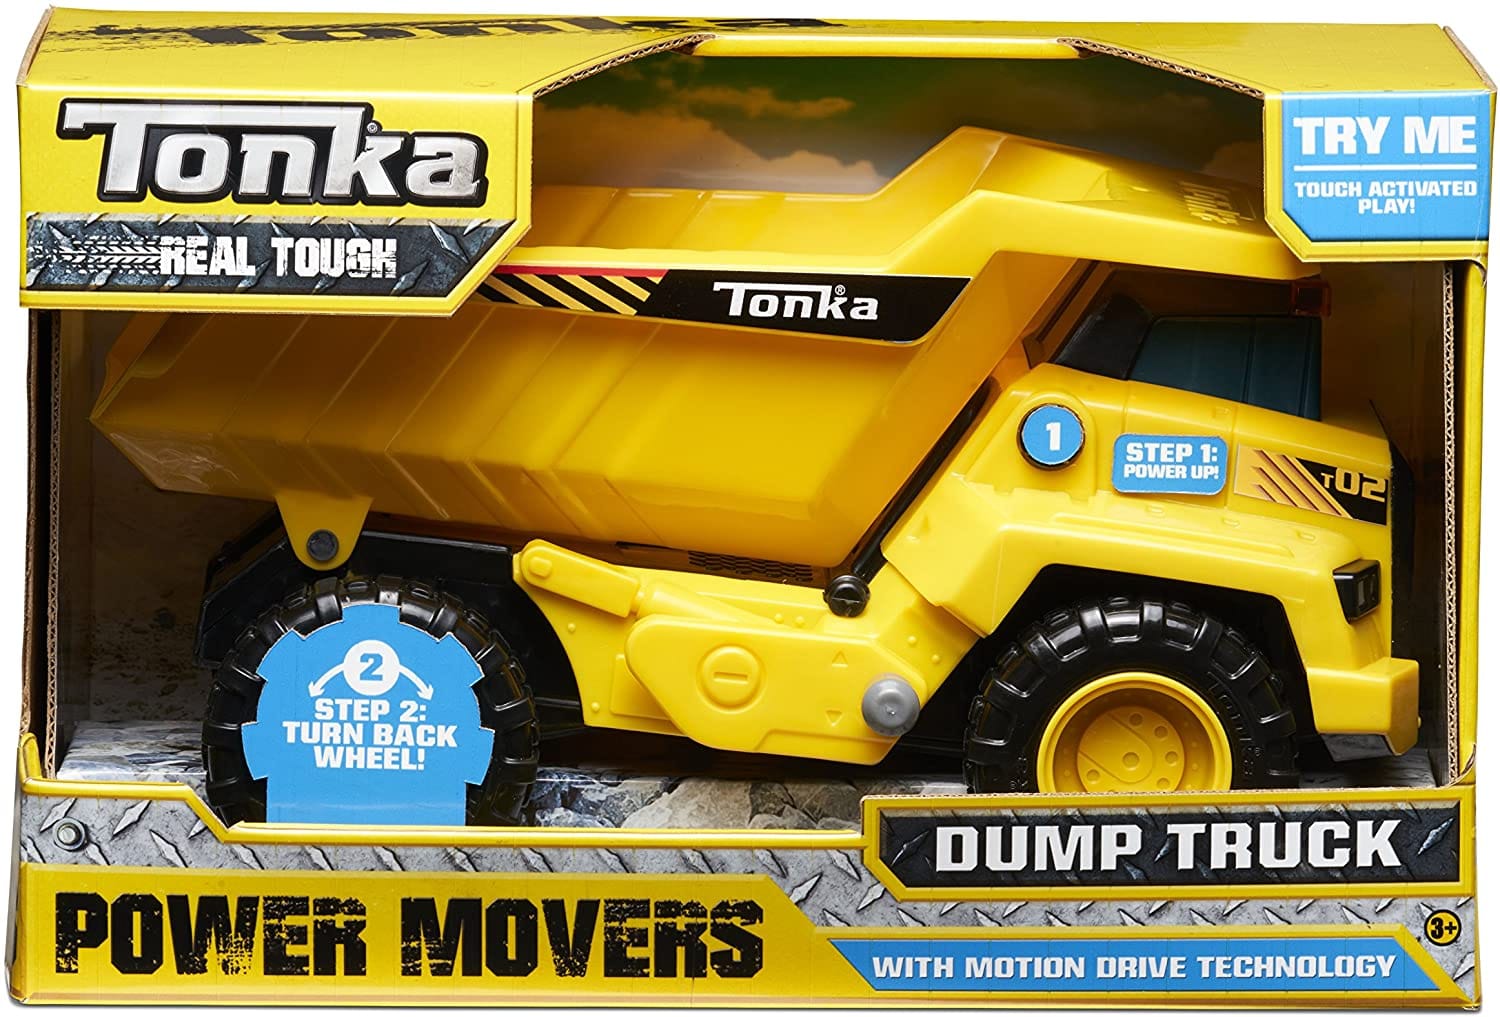 TONKA Power Movers: This rugged Dump Truck features new Motion Drive Technology allowing for fun and intuitive play - 08045